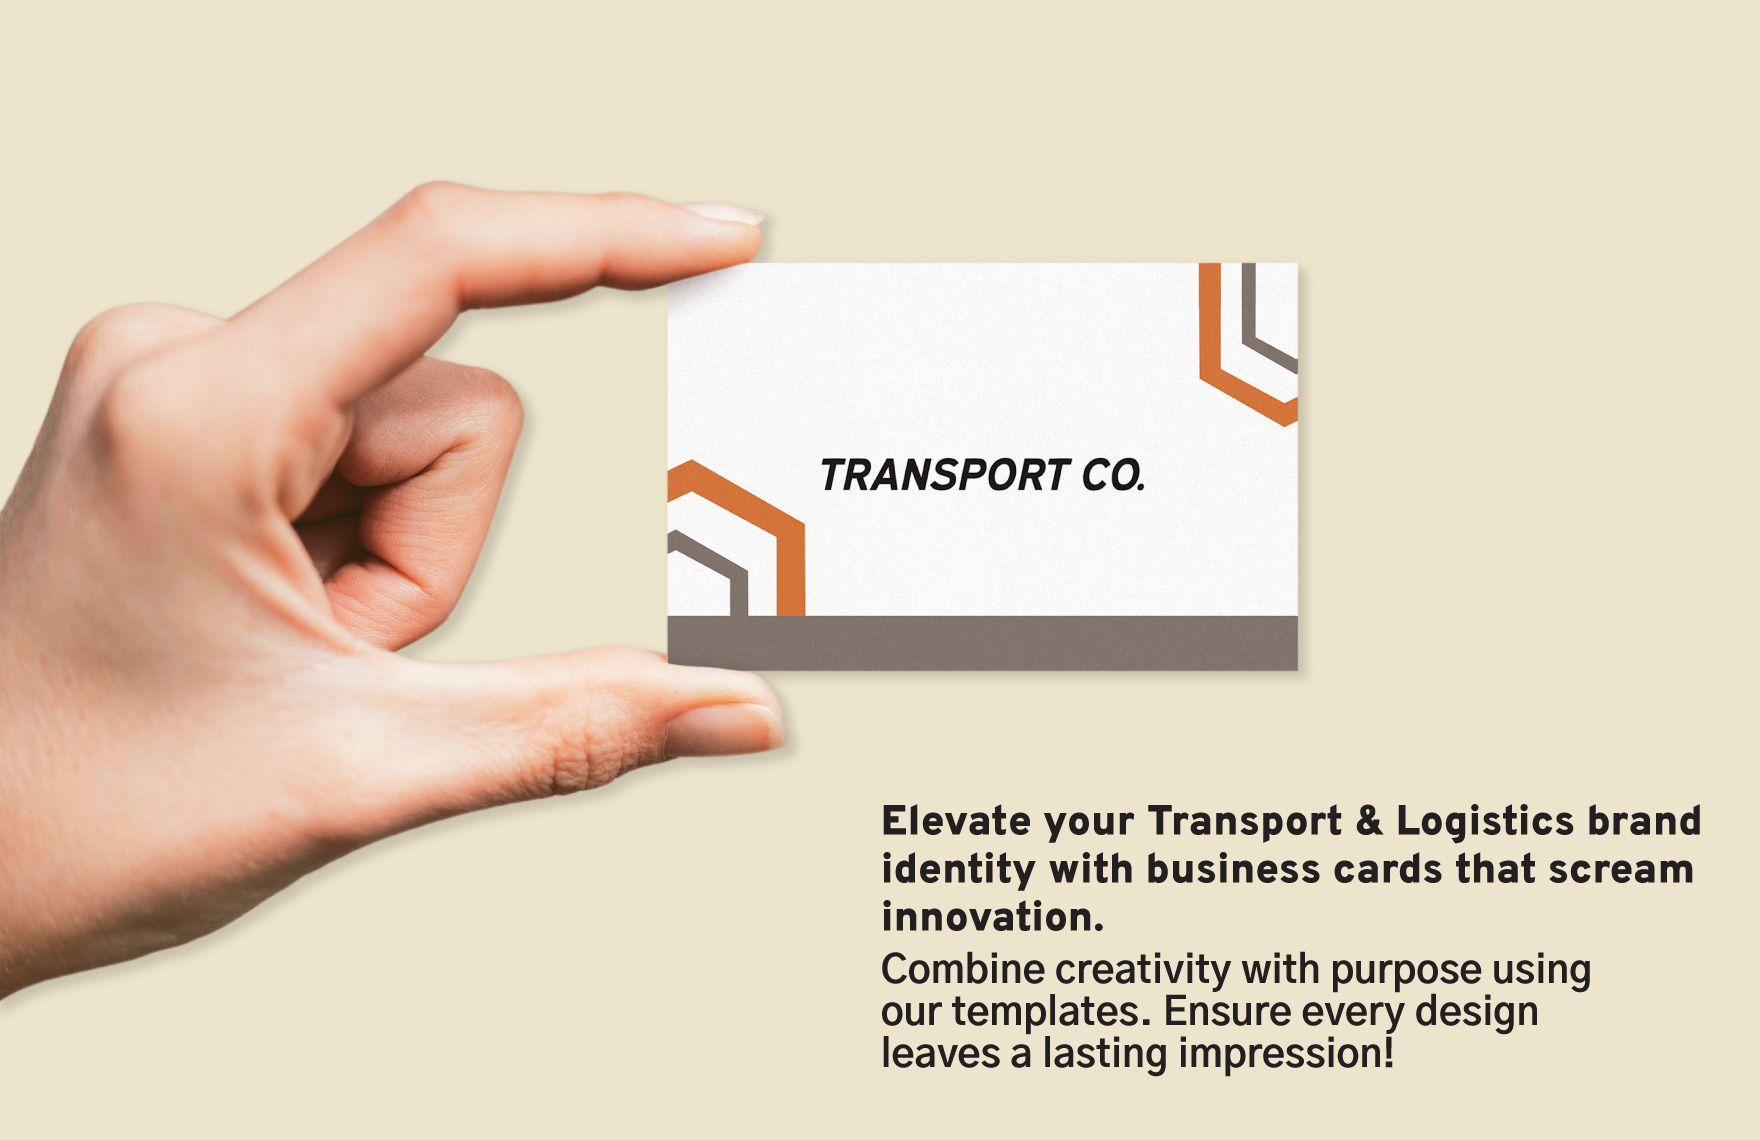 Transport and Logistics Warehouse Manager Business Card Template